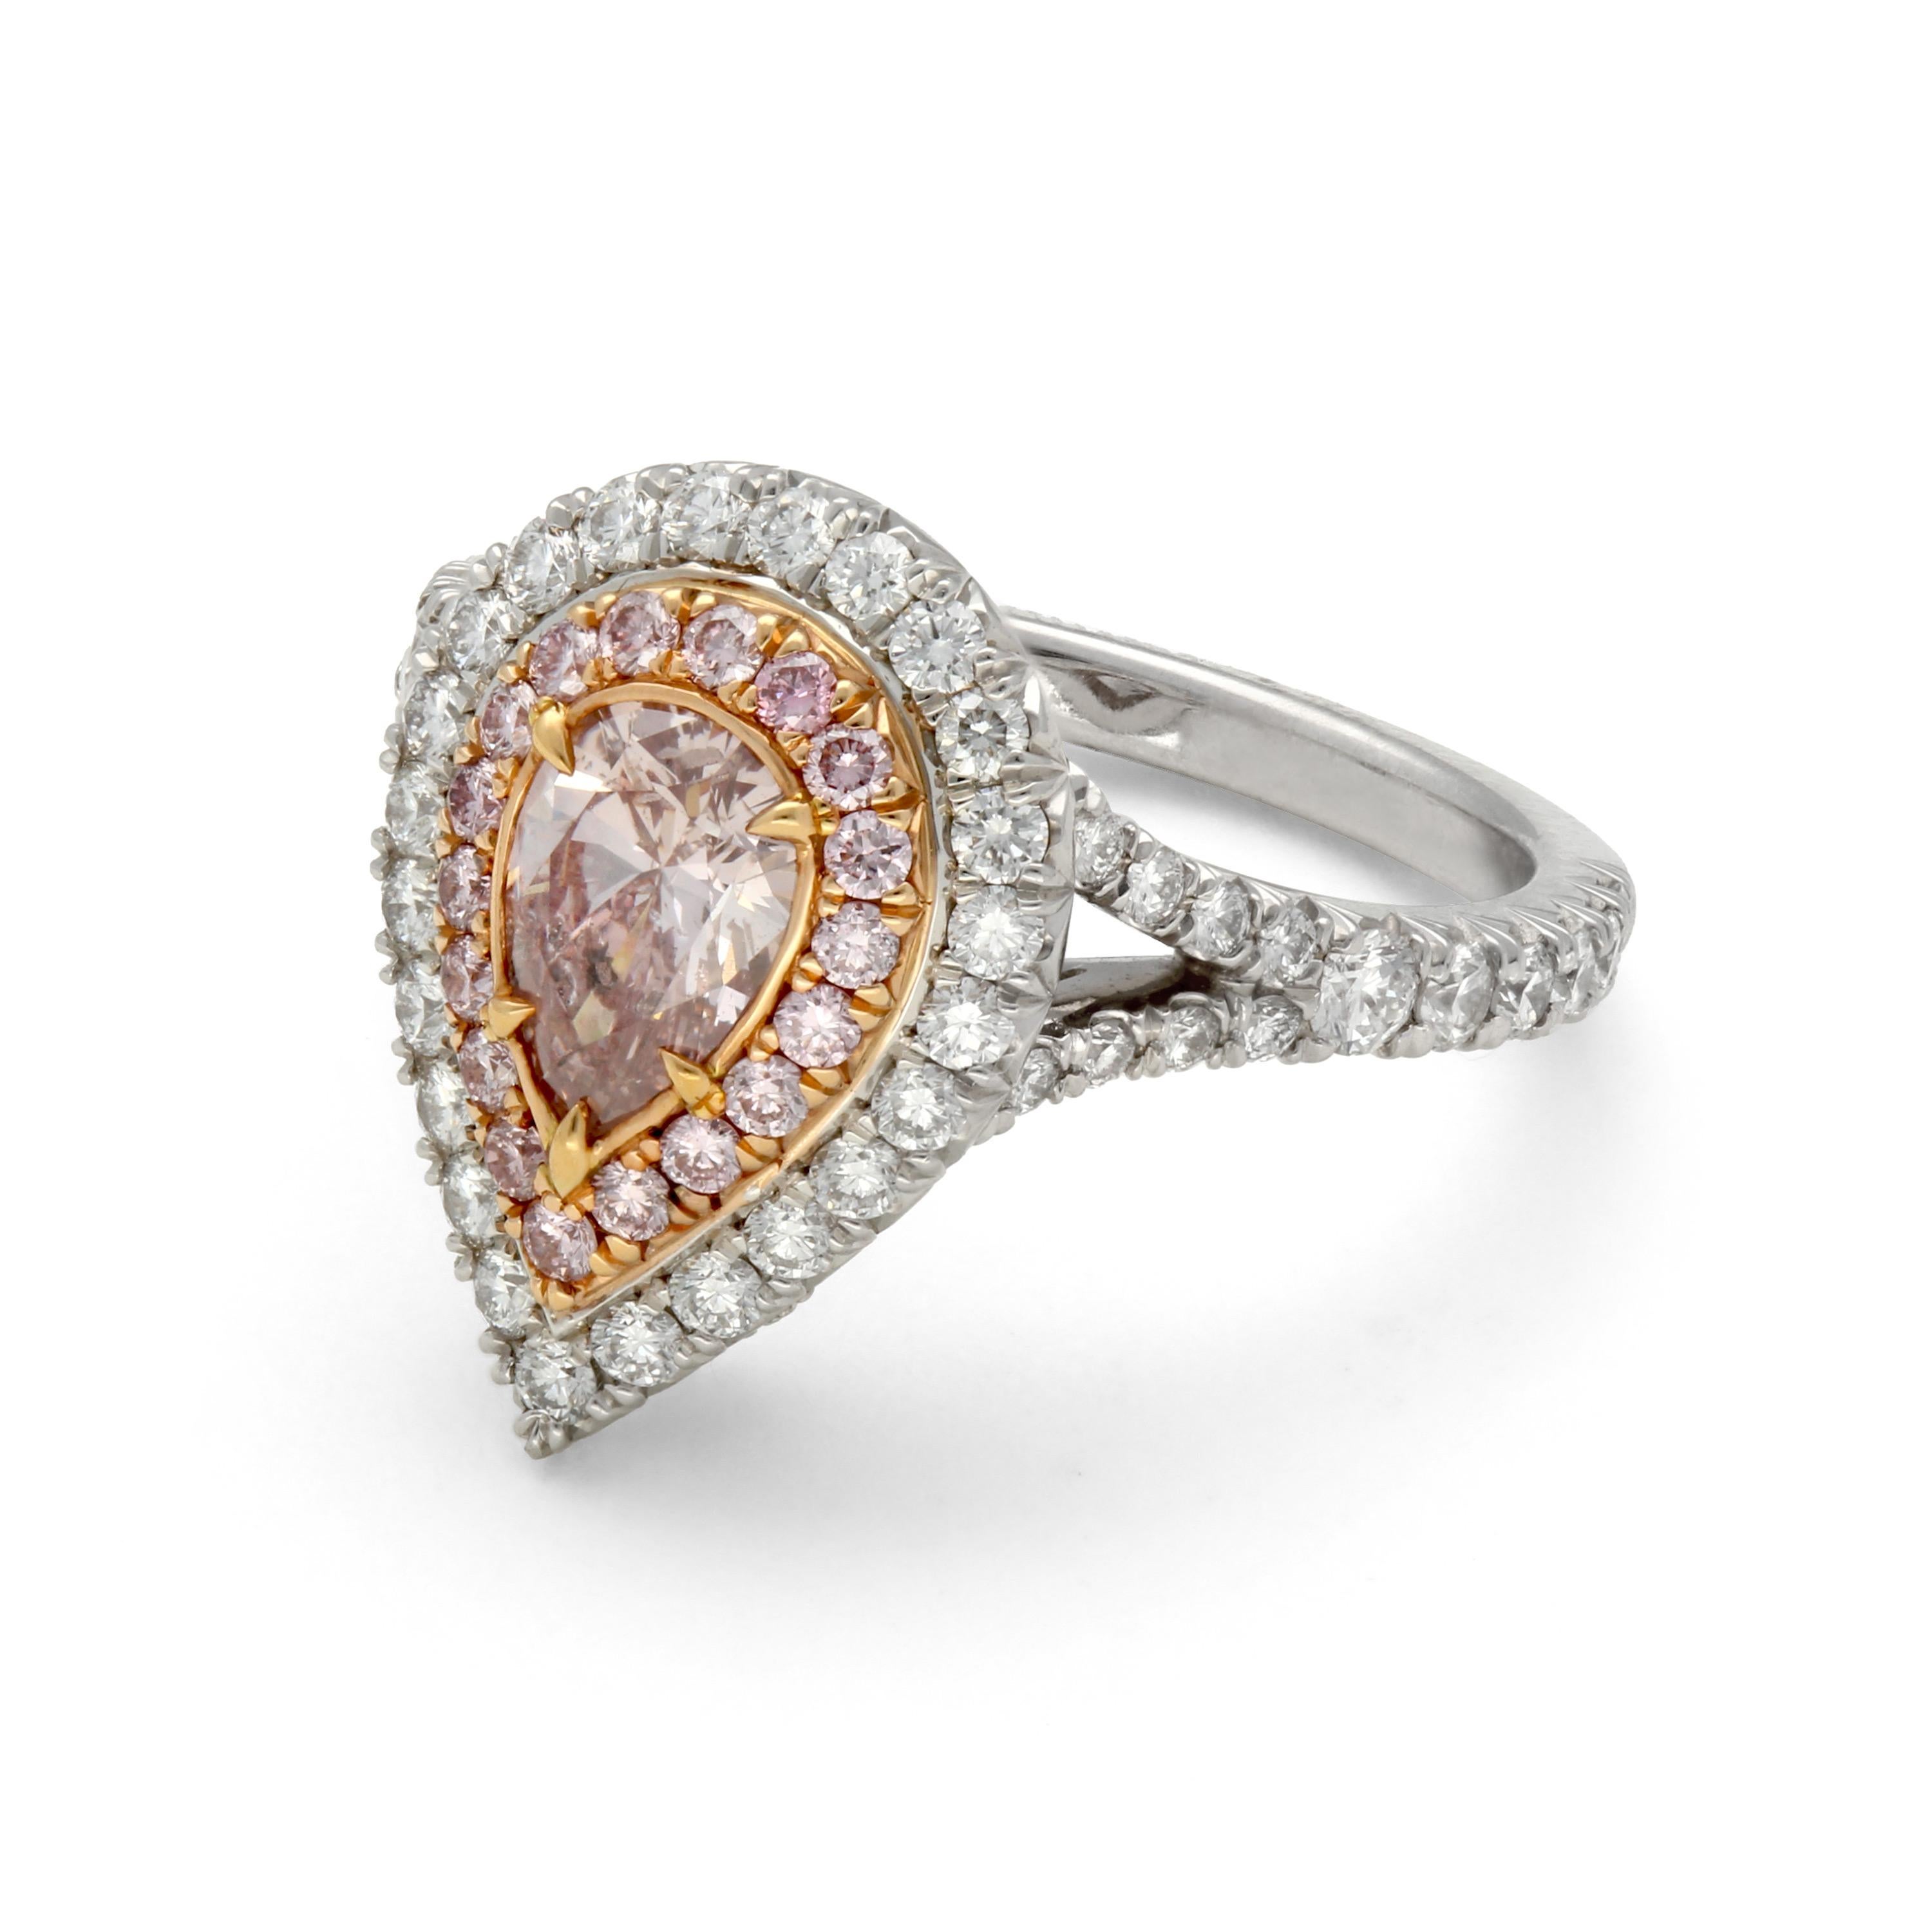 This platinum and 18 karat rose gold engagement ring features a diamond double halo accent and additional diamonds on the trim .  A .69 carat pear shaped fancy pink diamond center is surrounded with .77 total carats of colorless diamonds and .20